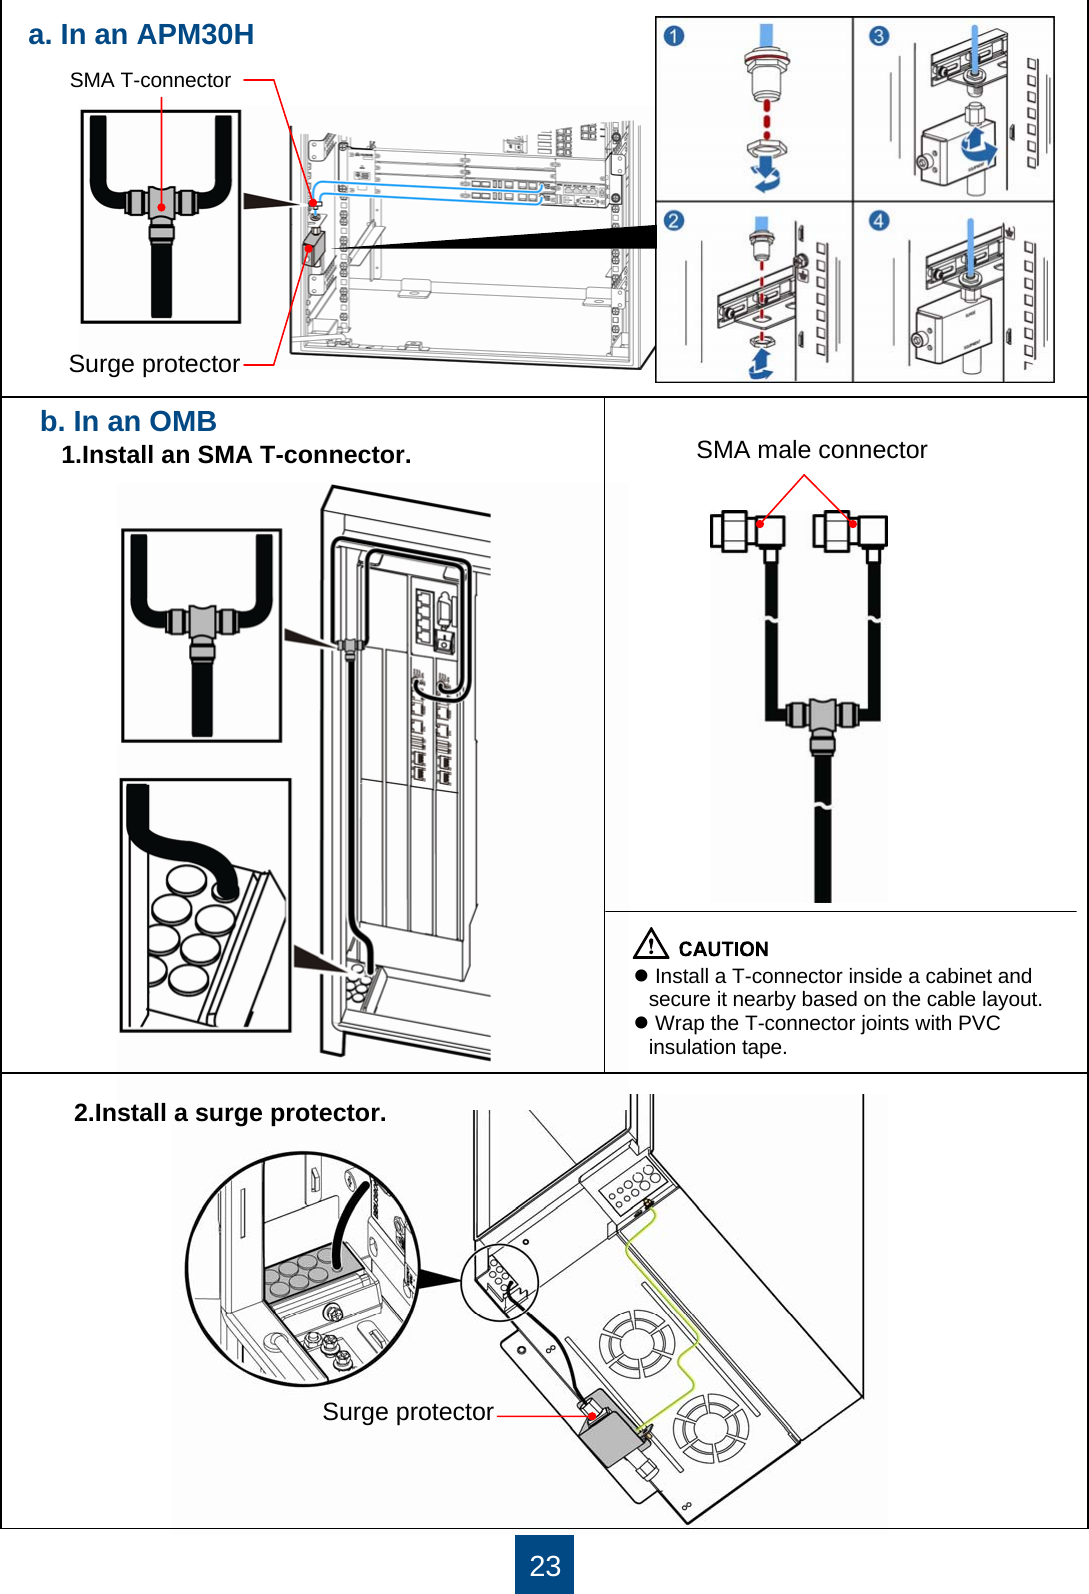 23b. In an OMB1.Install an SMA T-connector.2.Install a surge protector.Surge protectorSMA male connectorzInstall a T-connector inside a cabinet and secure it nearby based on the cable layout.zWrap the T-connector joints with PVC insulation tape.a. In an APM30HSMA T-connectorSurge protector